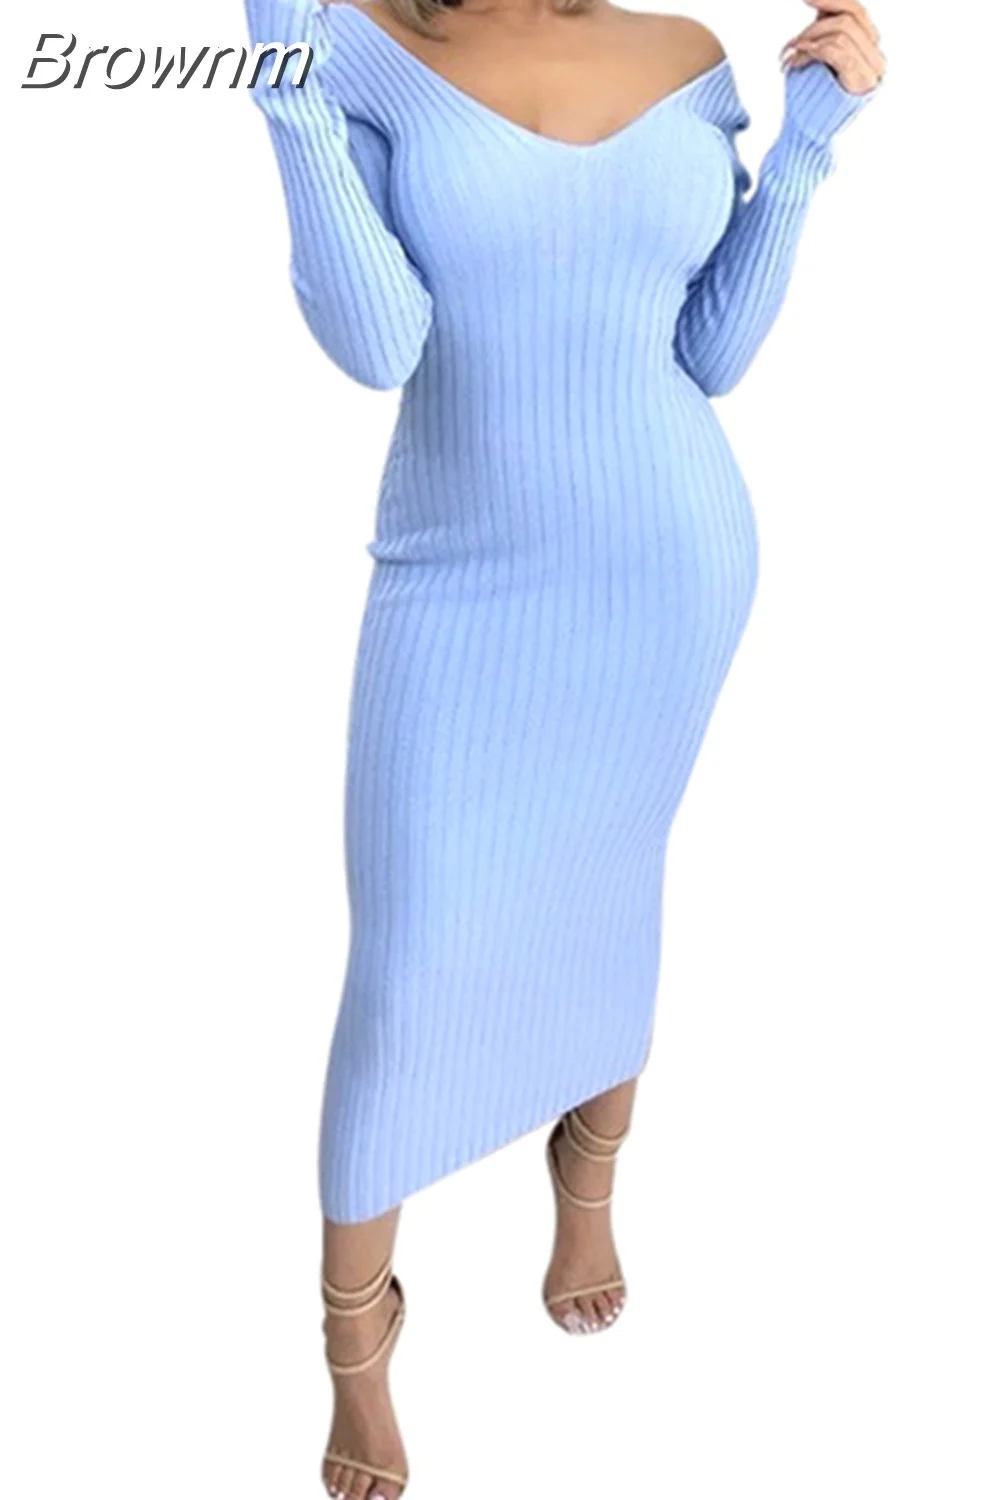 Brownm Winter Ribbed Knitted Cotton Dress Women Off Shoulder Long Sleeve Sexy Bodycon Dresses Elastic Slim Party Vestidos 2023